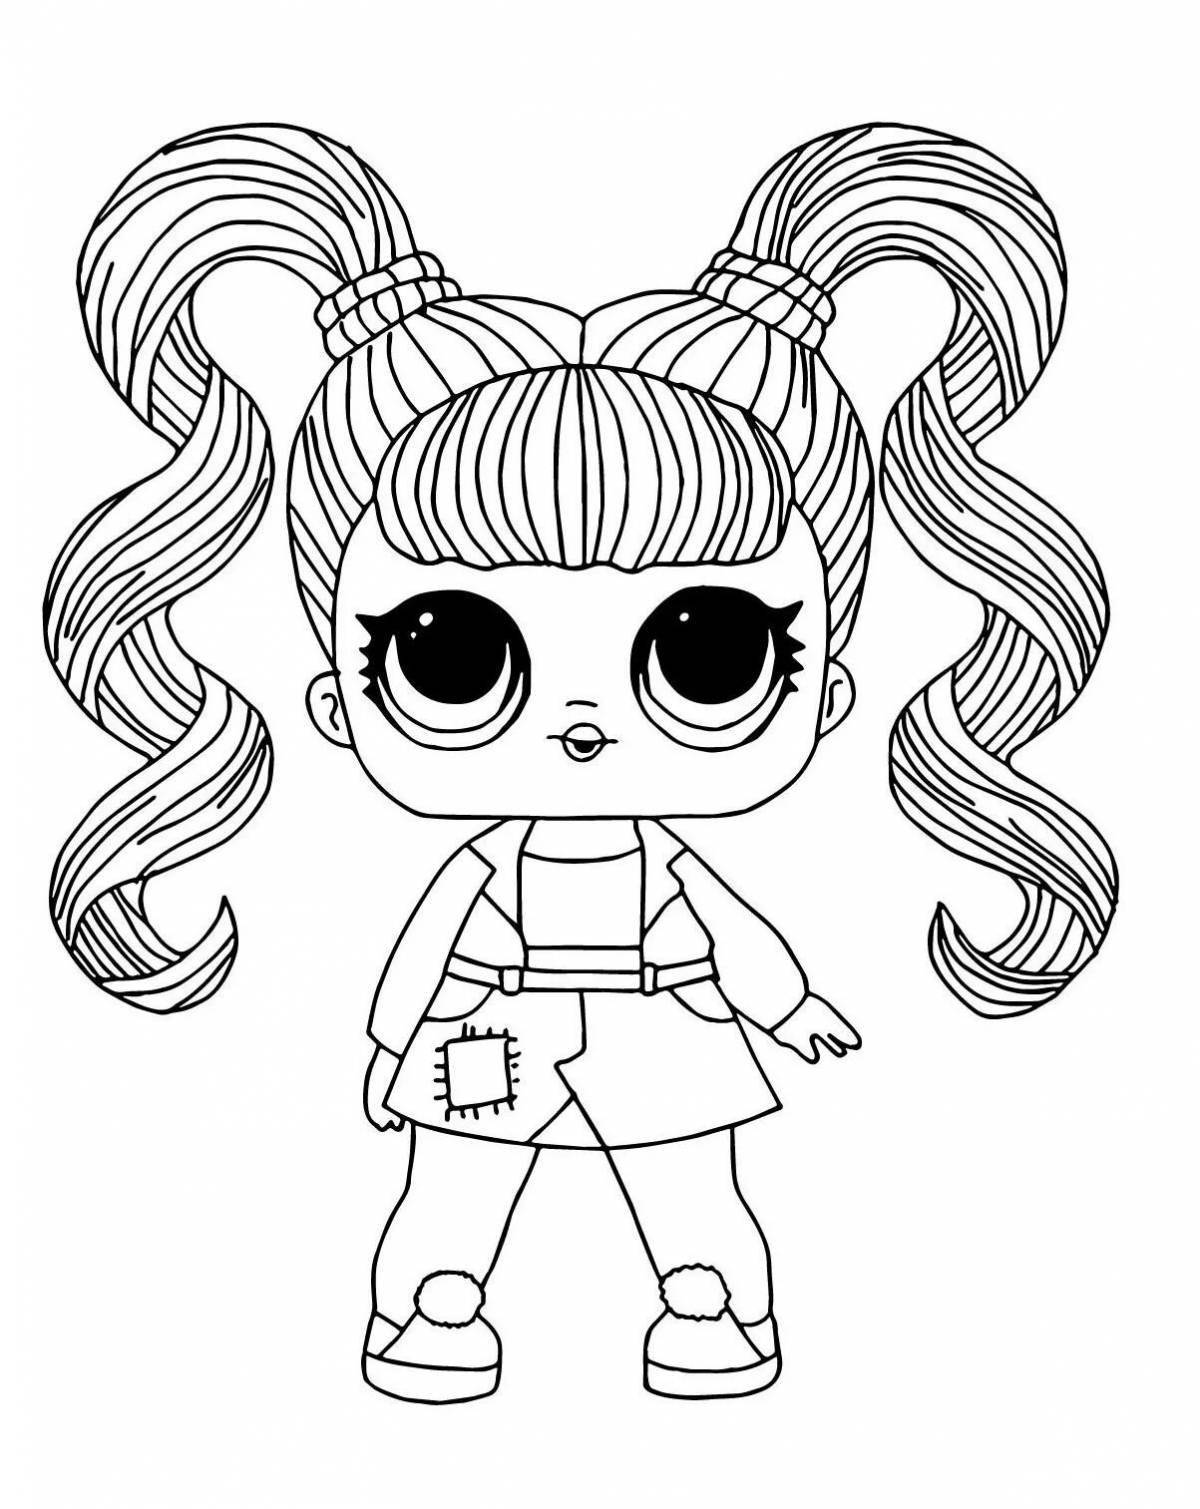 Exquisite lol doll coloring book